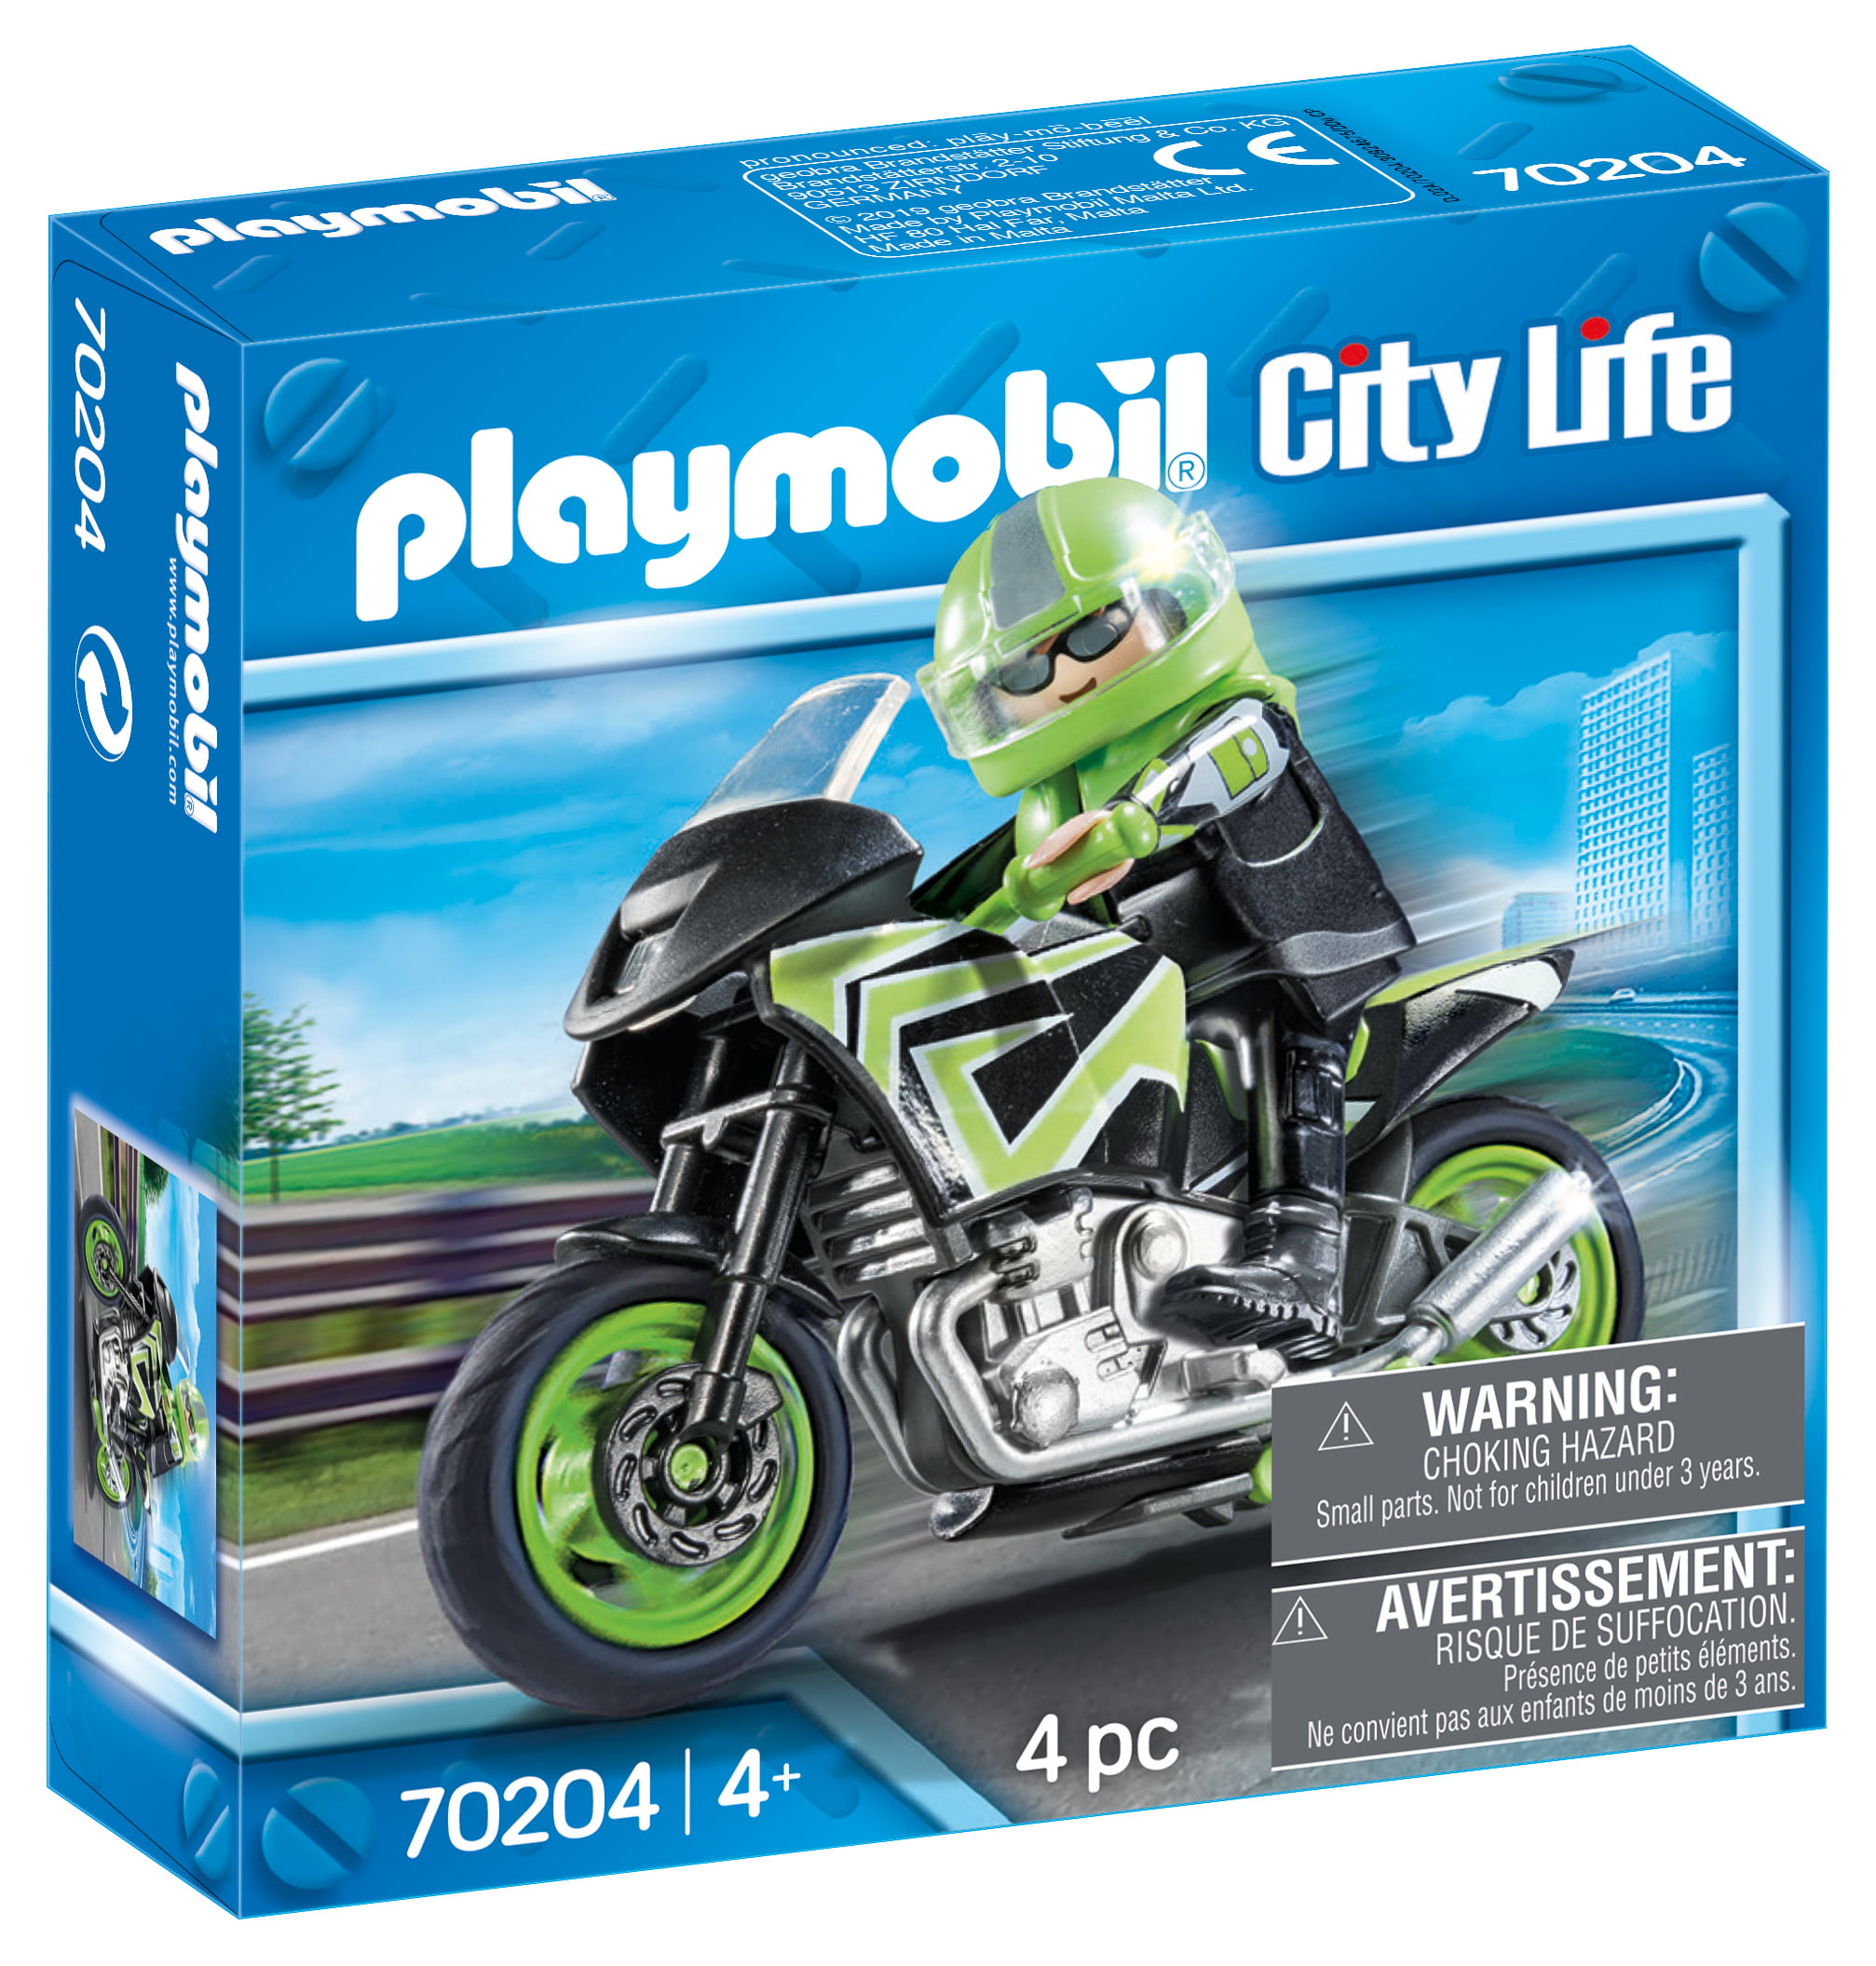 PLAYMOBIL Prison Escape Police Motorcycle - Children Ages 4+ 